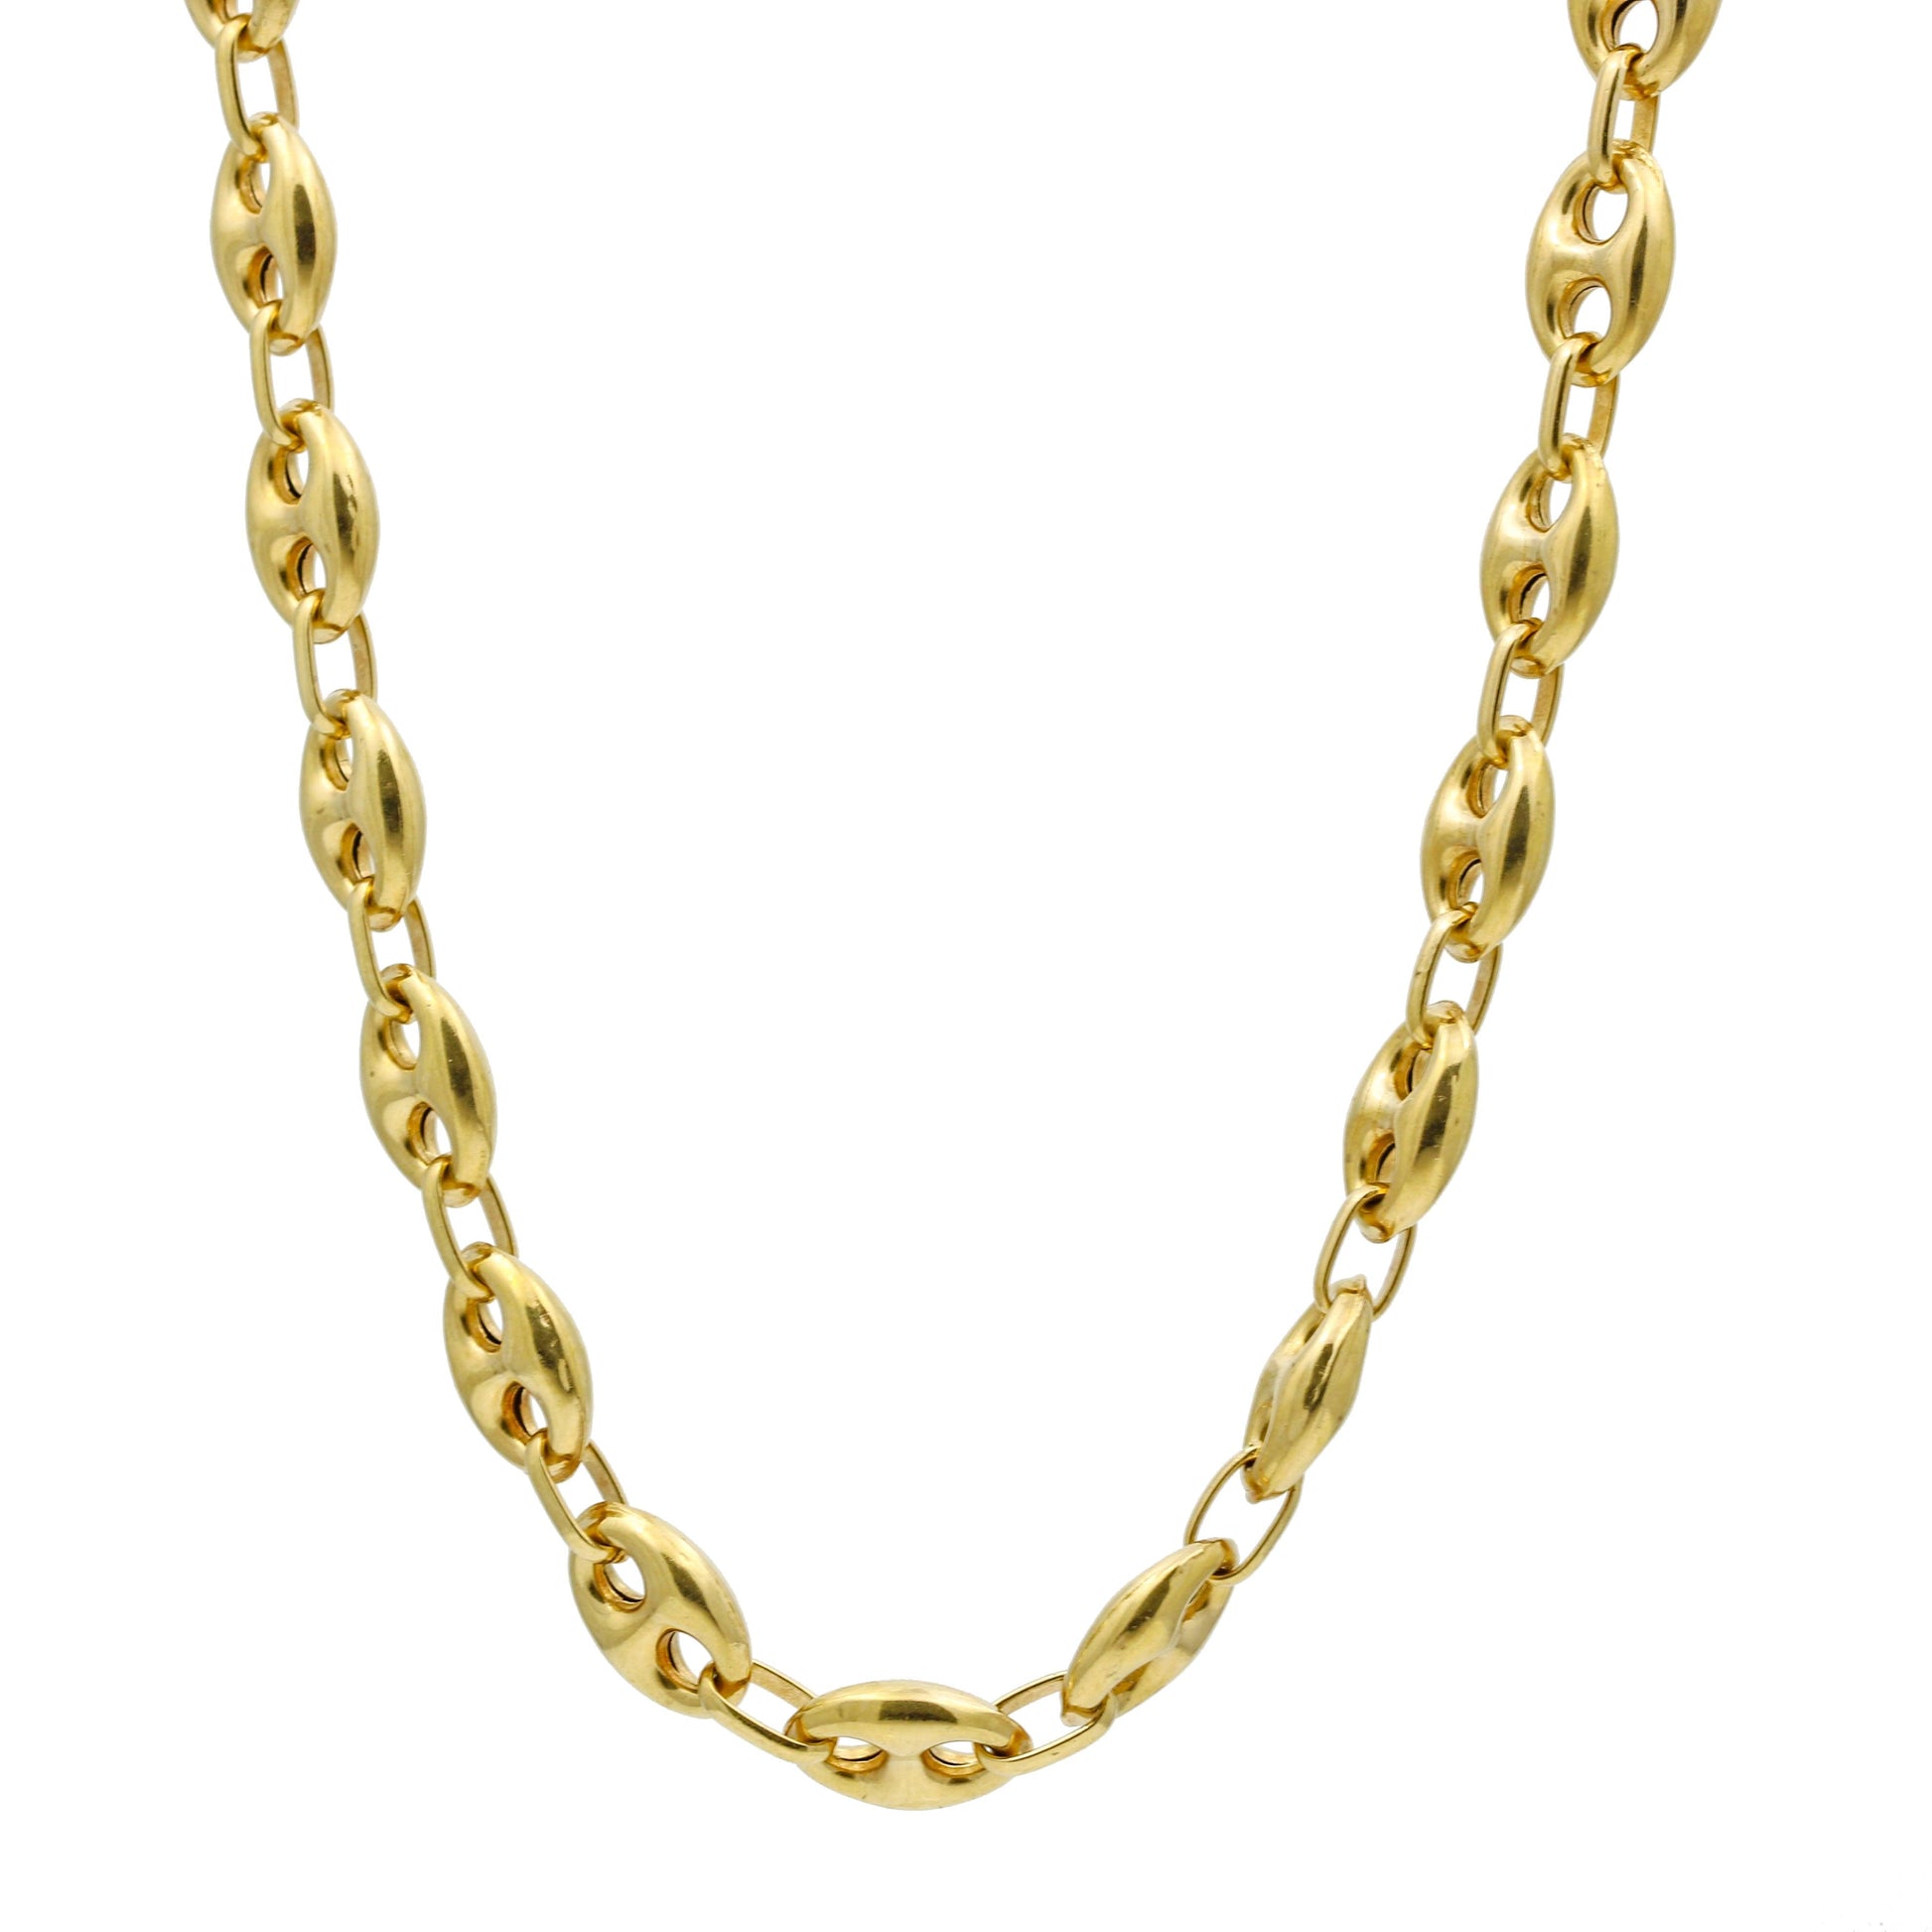 Mariner's Puff Link 8.5mm 18k Yellow Gold Chain Necklace 24" - 31 Jewels Inc.